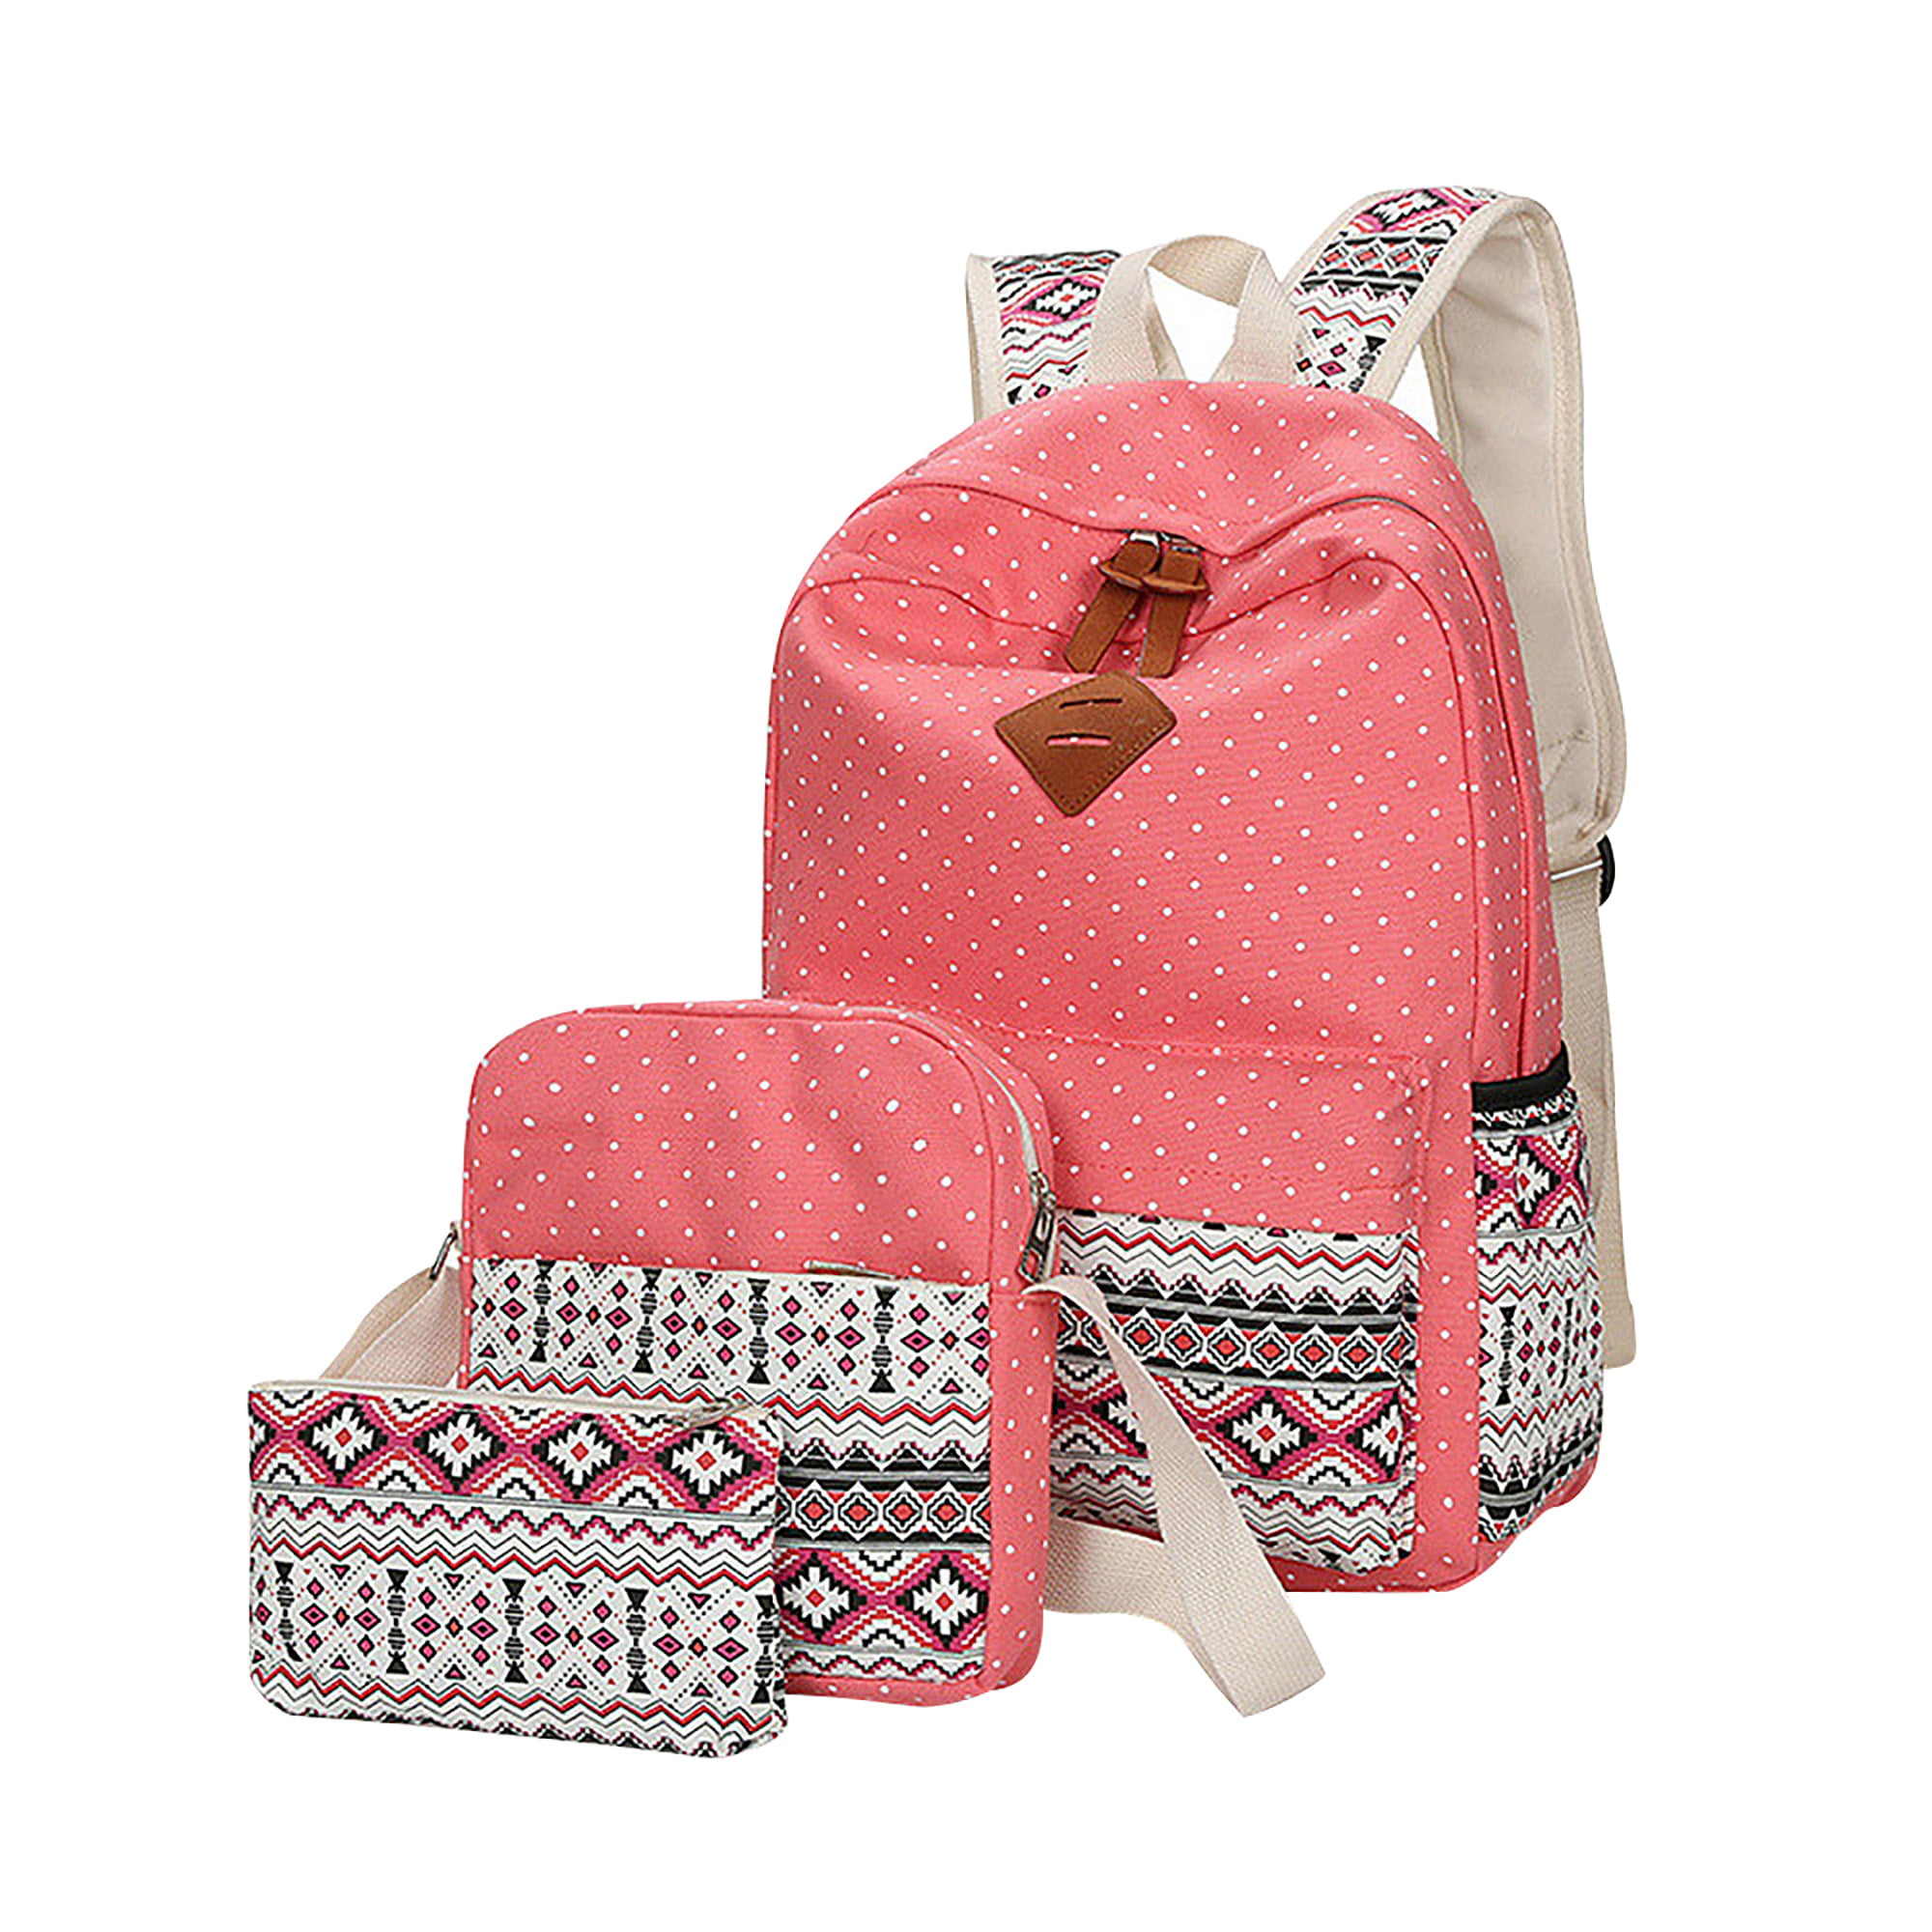 Topcobe Elementary School Backpack For Women Fashion Canvas